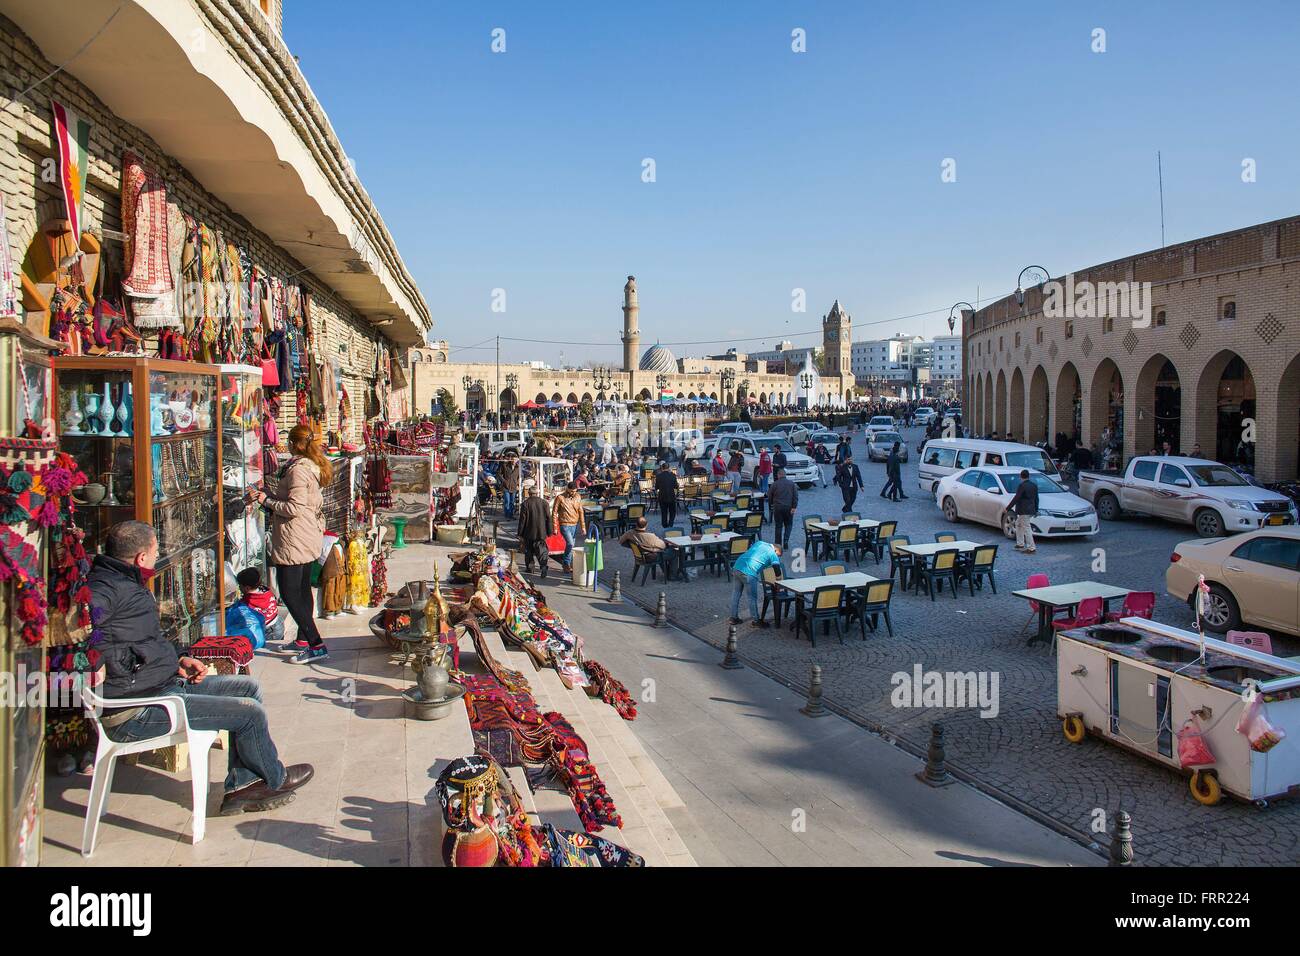 shop near the ancient Citadel of Arbil in Northern Iraq Stock Photo